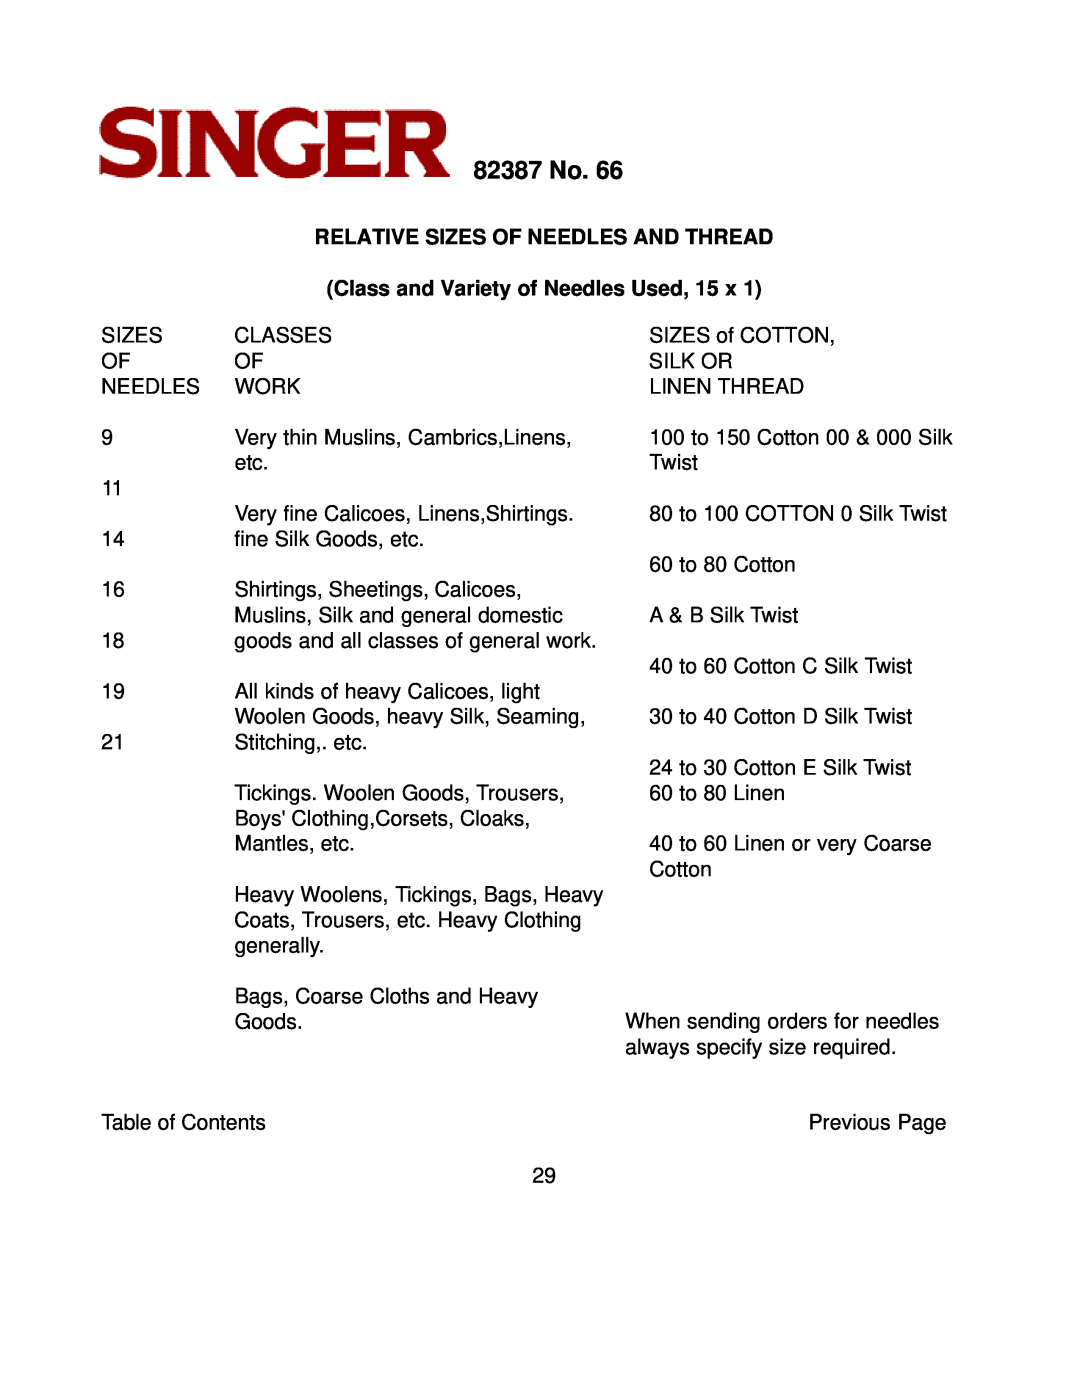 Singer instruction manual Relative Sizes Of Needles And Thread, Class and Variety of Needles Used, 15 x, 82387 No 